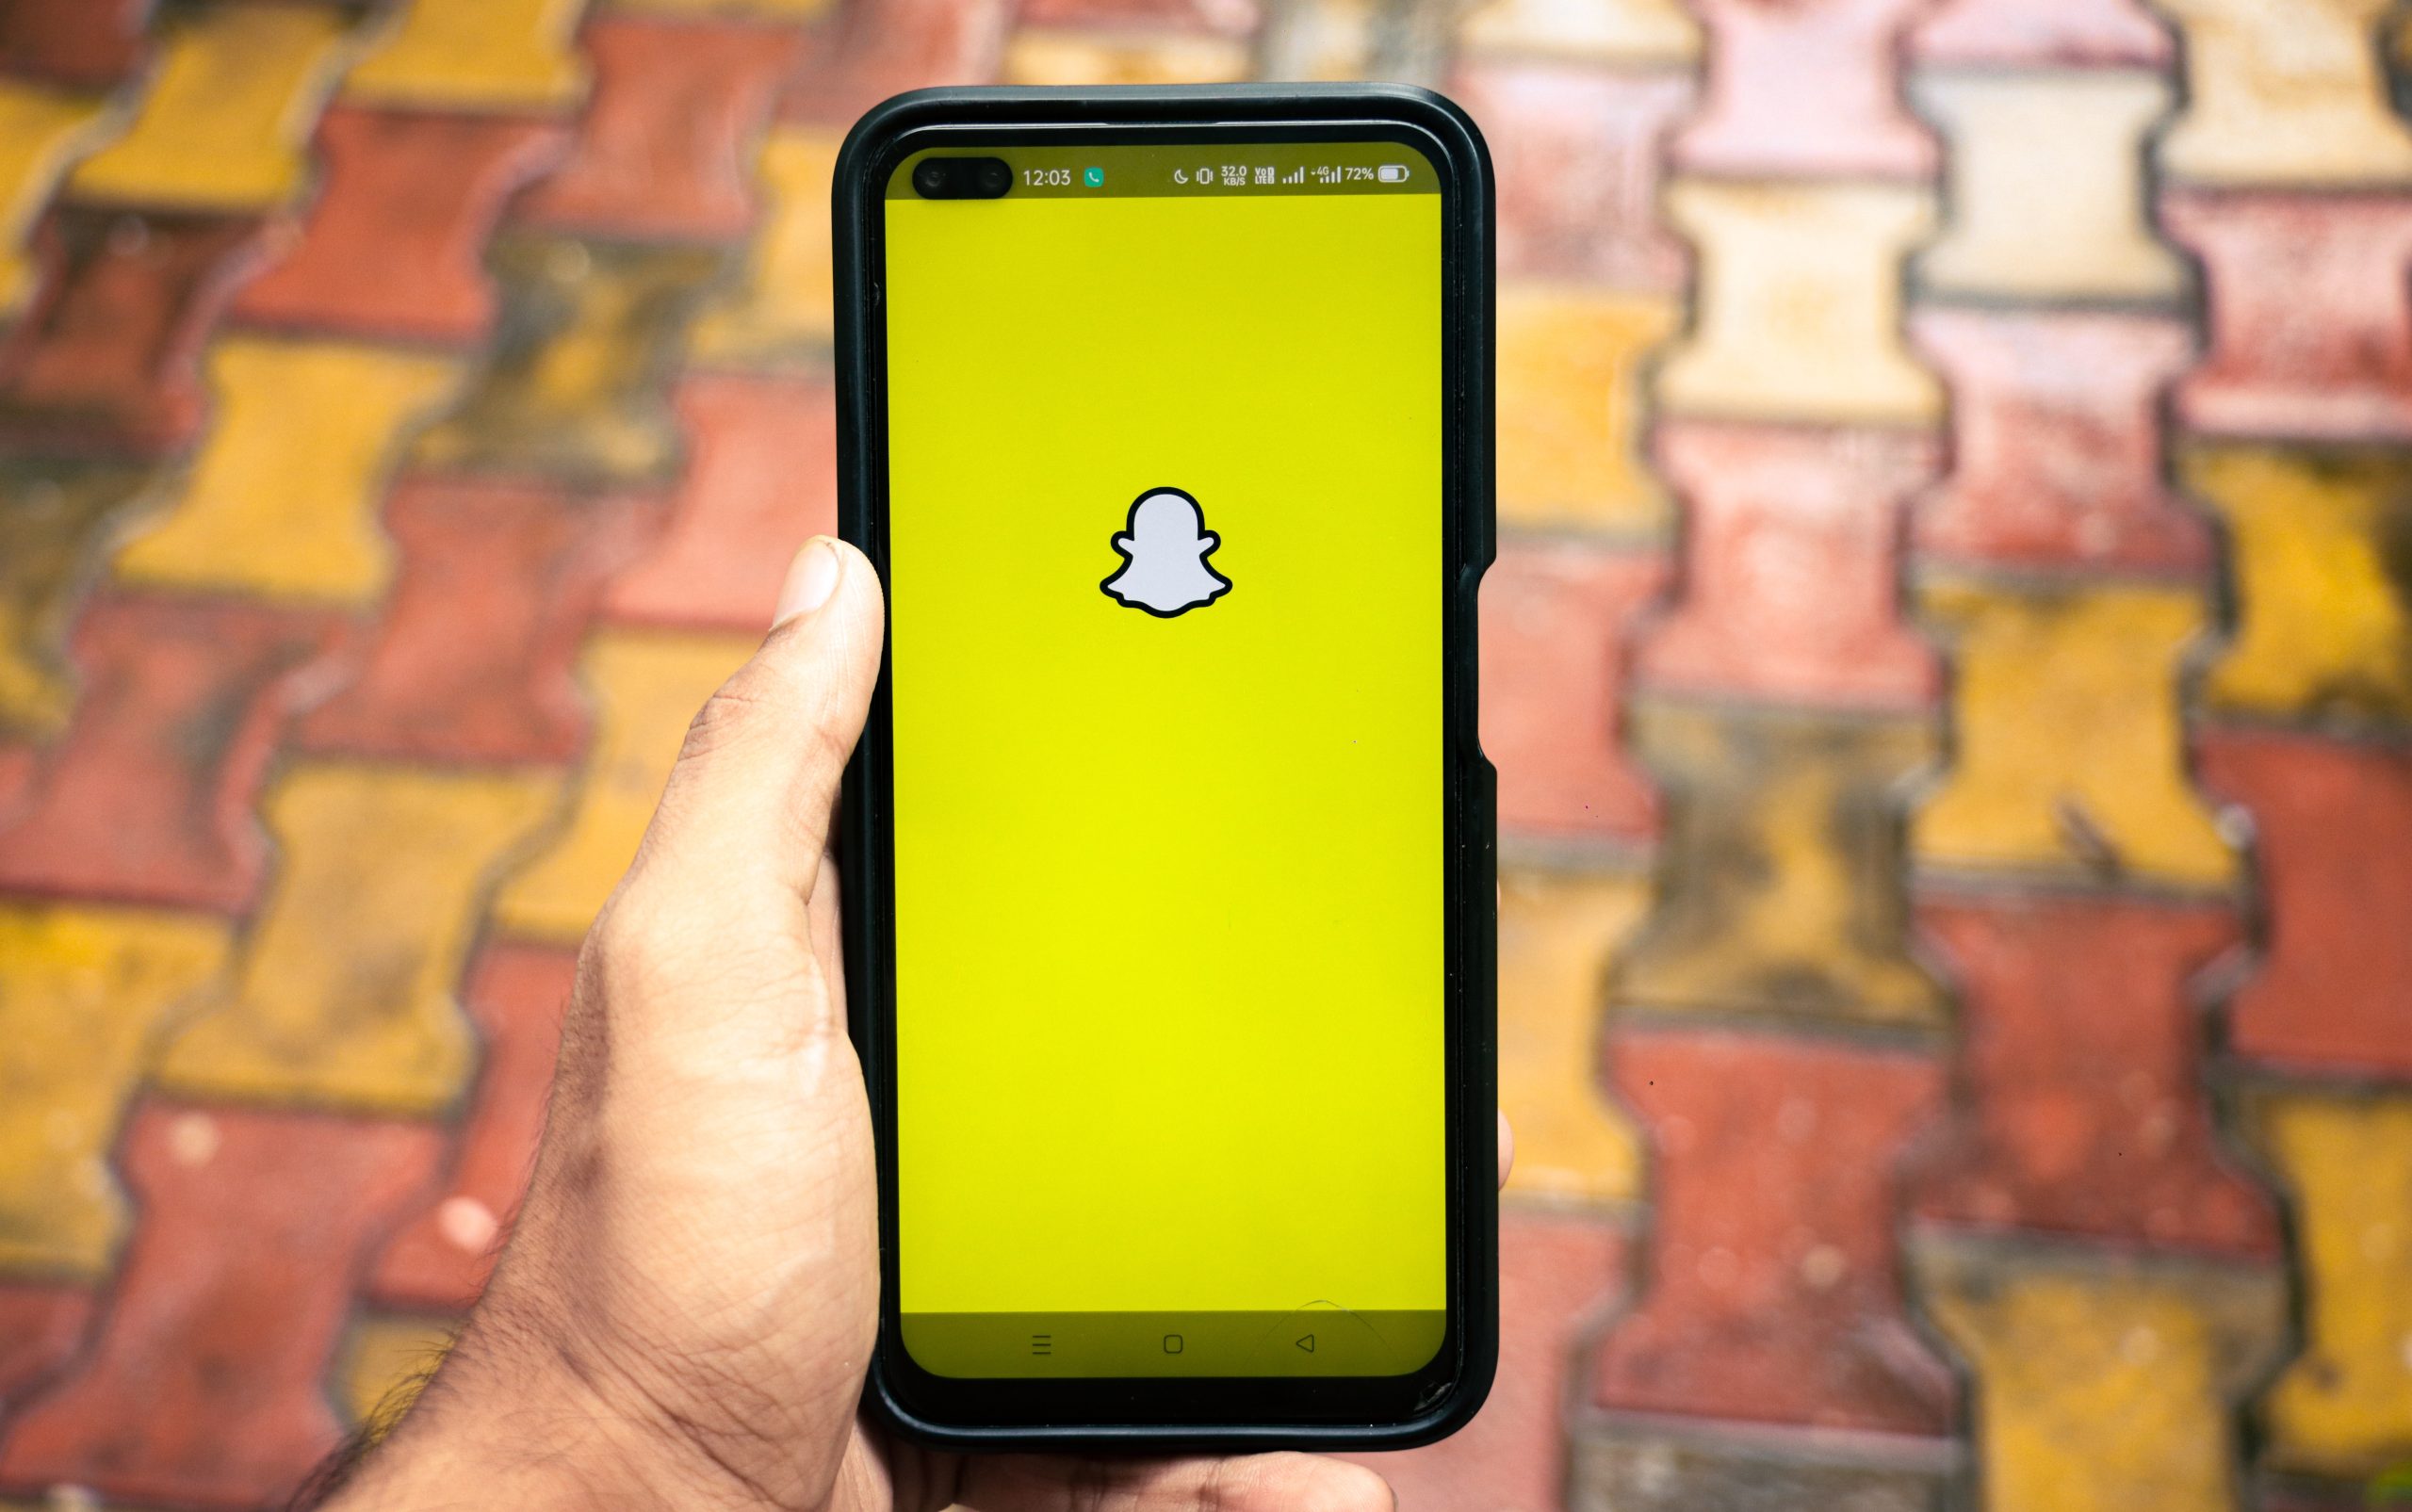 Additional Tips for Managing Snapchat Notifications